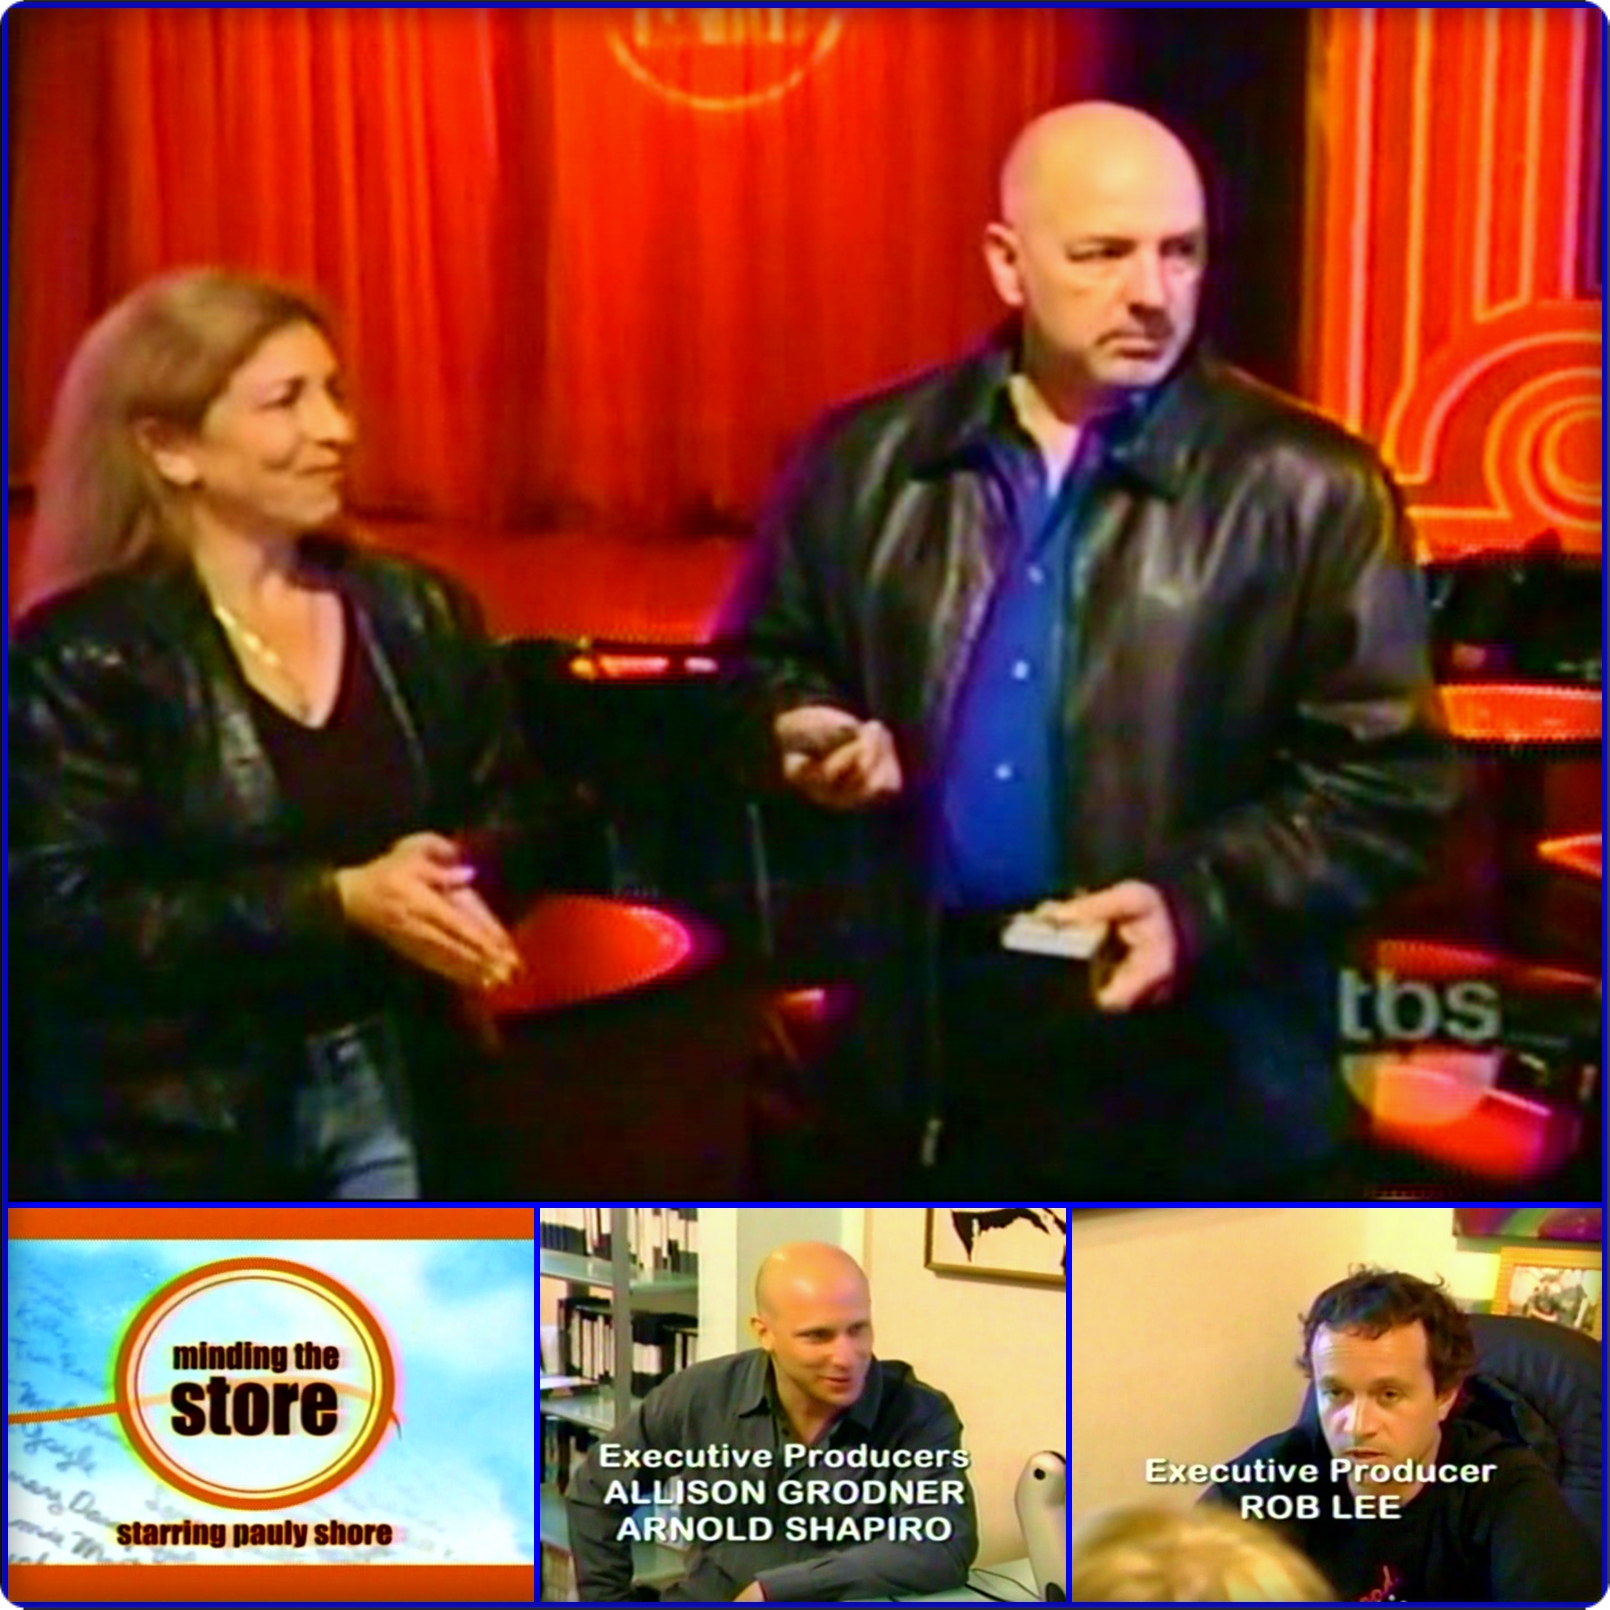 Daena Smoller with Larry Montz return to The Comedy Store in West Hollywood at the request of Mitzi Shore to film MINDING THE STORE Starring Pauly Shore (2005).